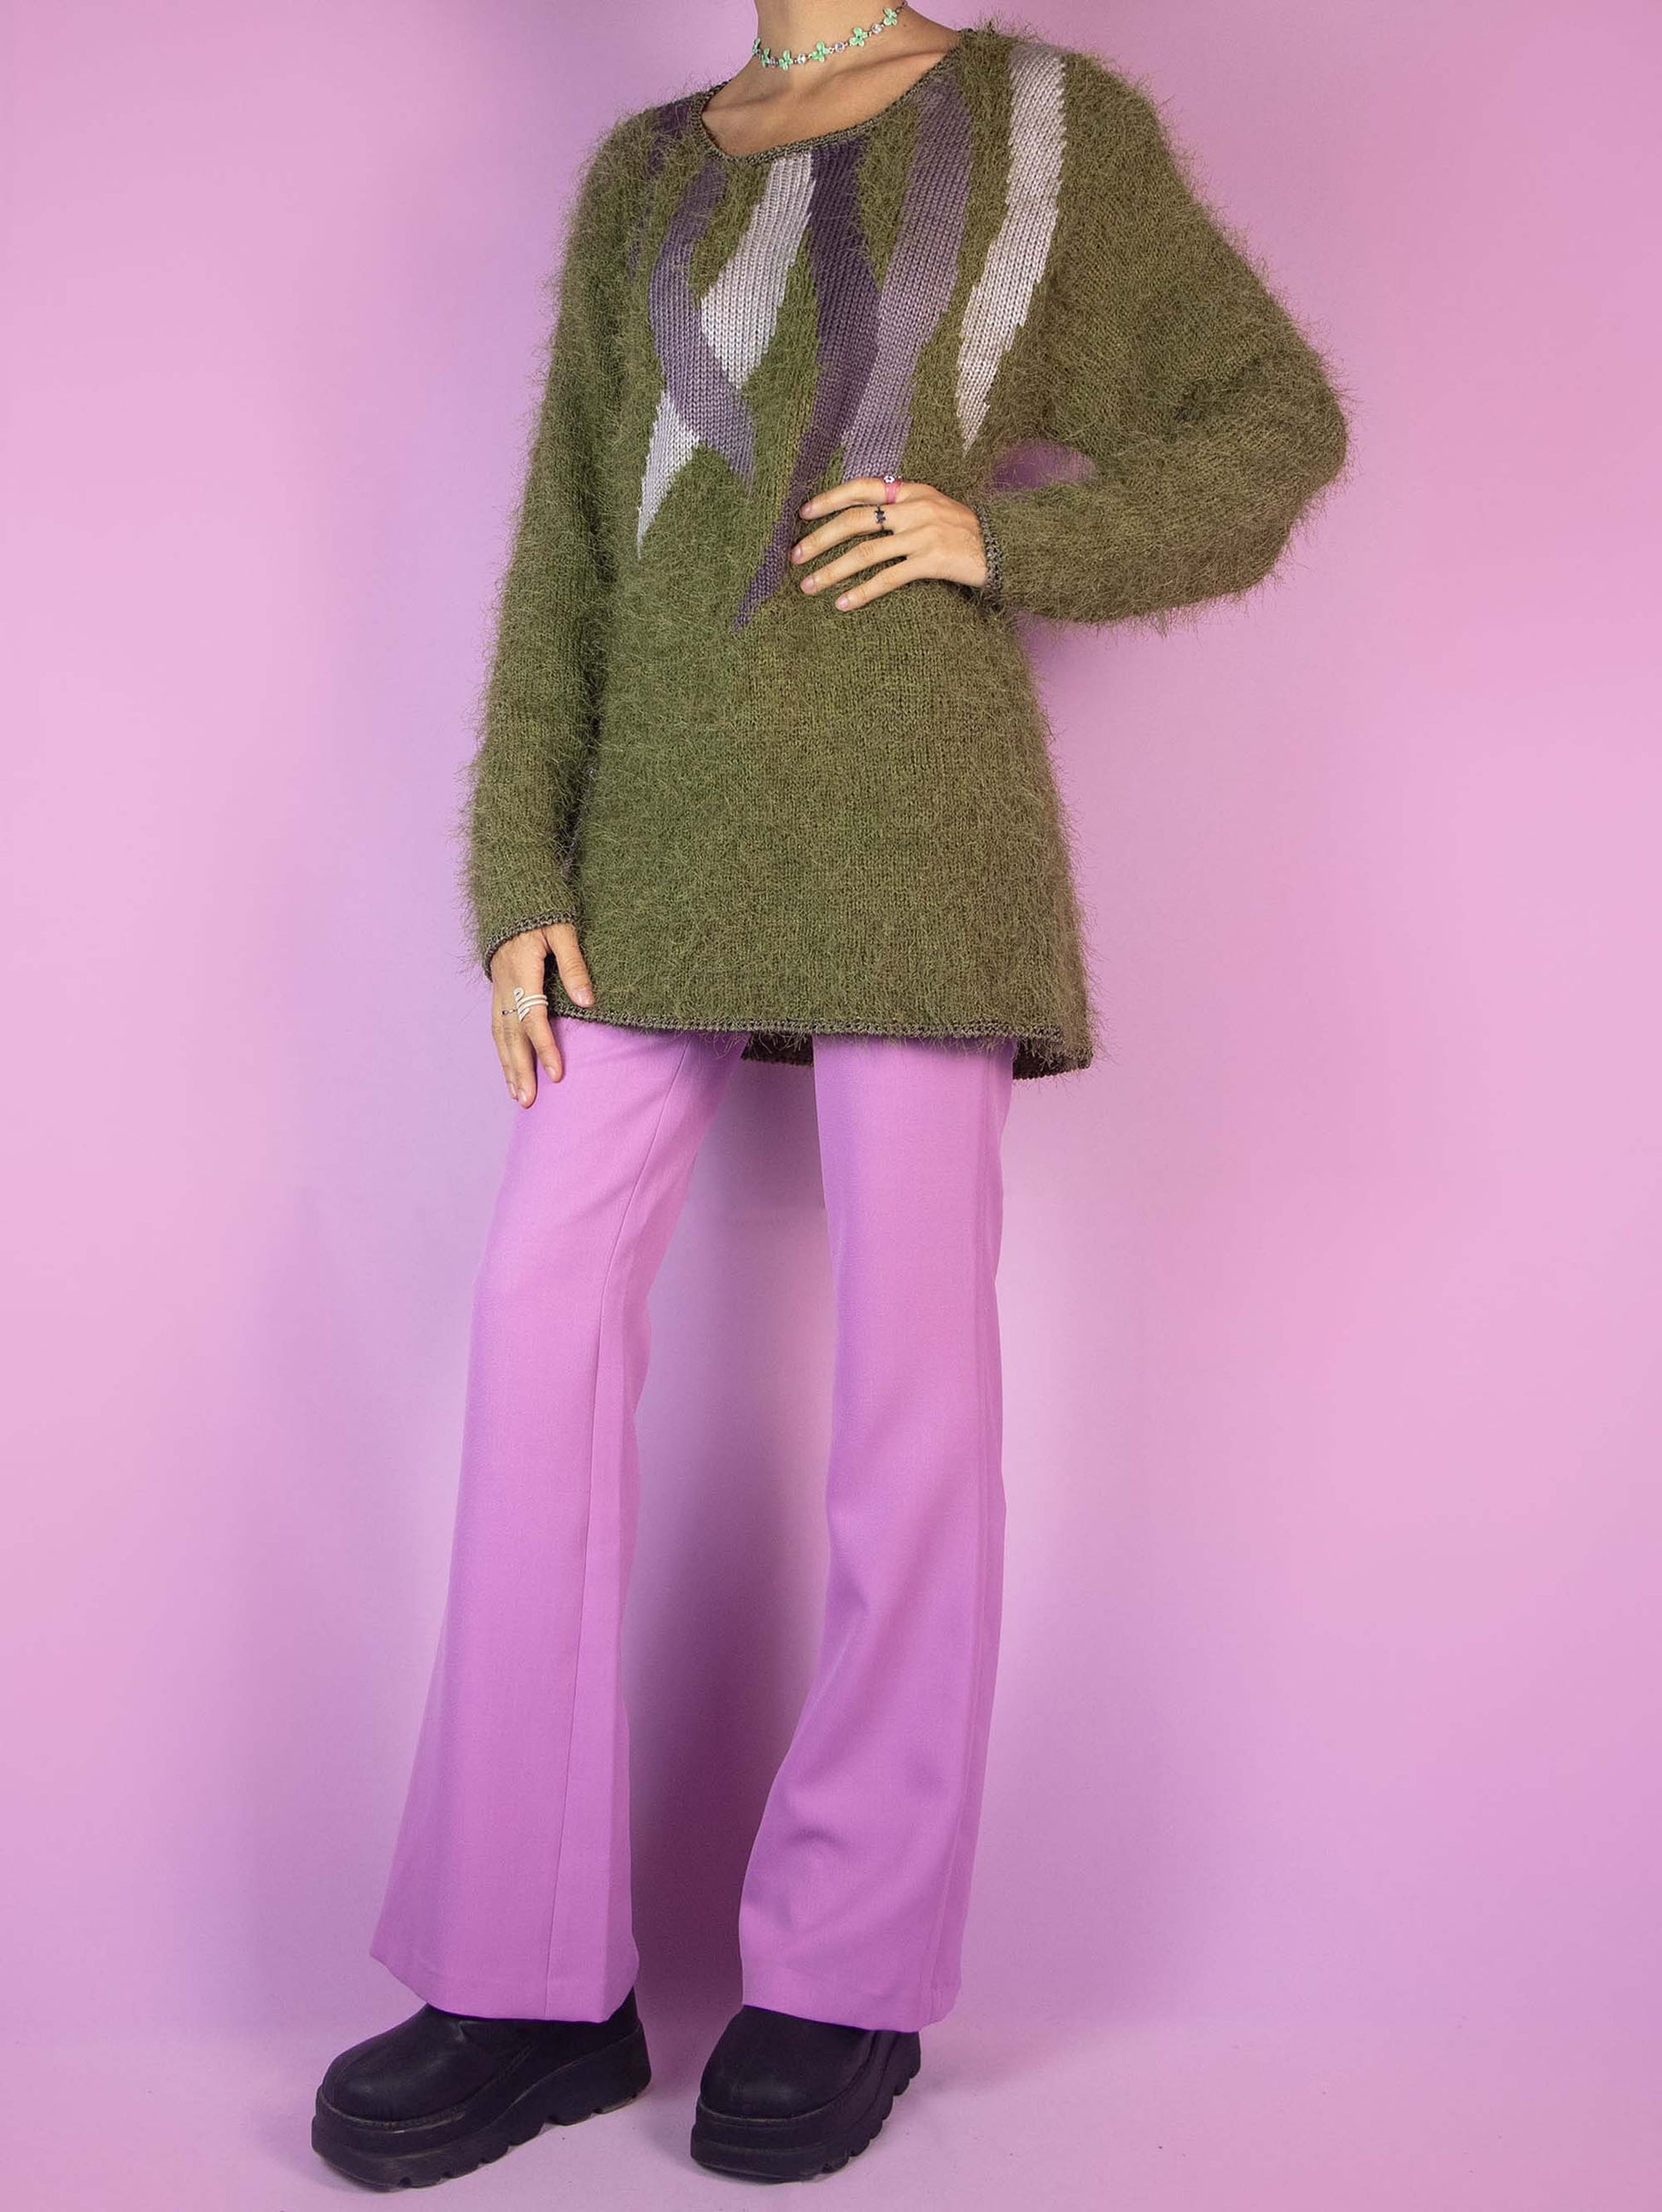 The Vintage 90s Green Hairy Knit Sweater is a khaki pullover with abstract purple details. Boho retro 1990s knitted jumper.